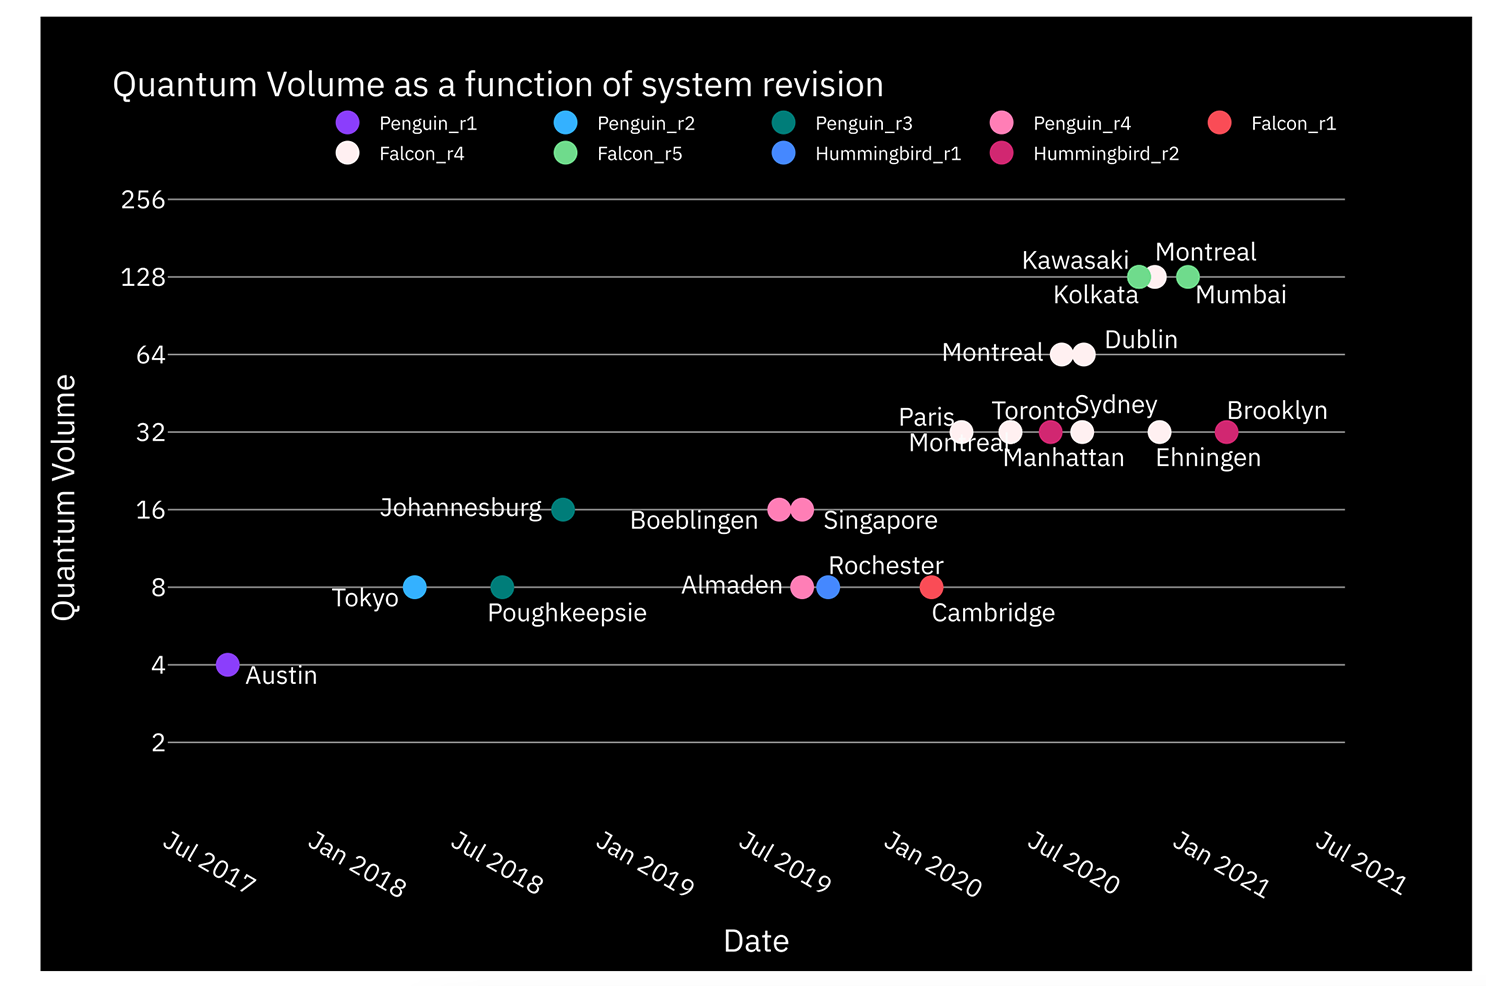 Quantum Volume as a function of system release date for IBM Quantum Penguin, Falcon, and Hummingbird systems. The Falcon and Hummingbird  are based on the heavy-hex topology.